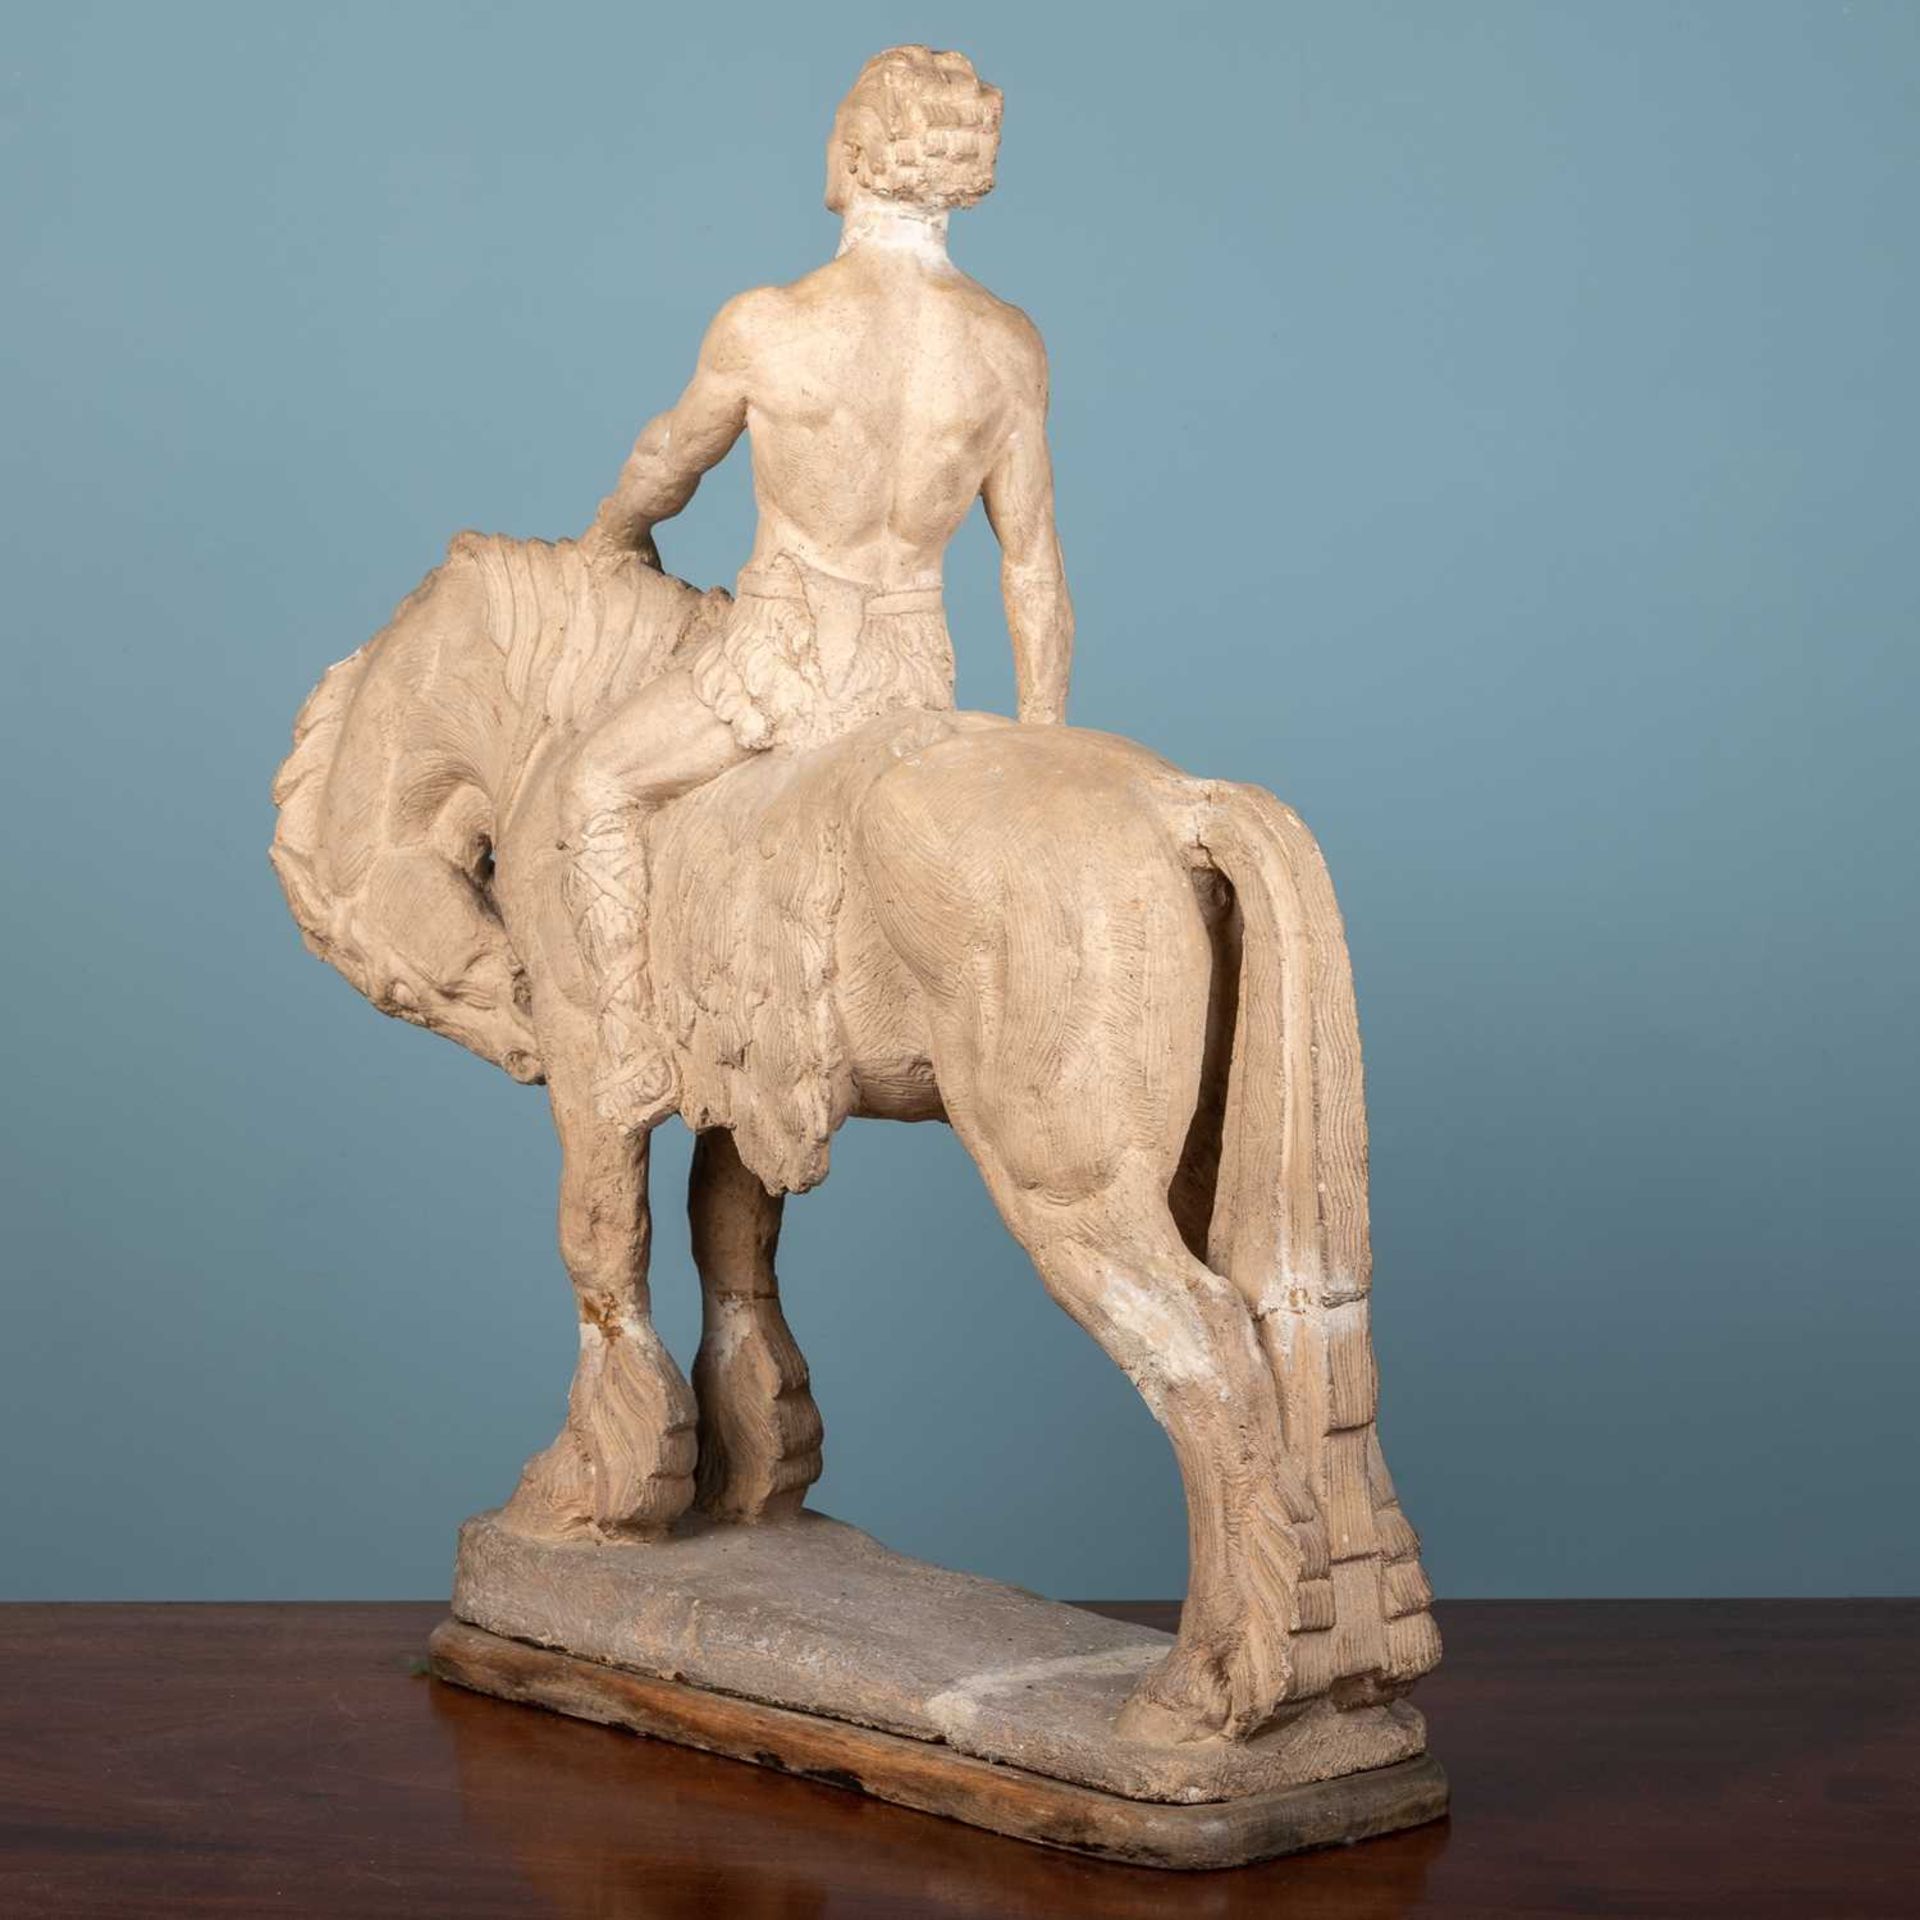 Early 20th century German school terracotta figure of a warrior on a horse - Image 3 of 15